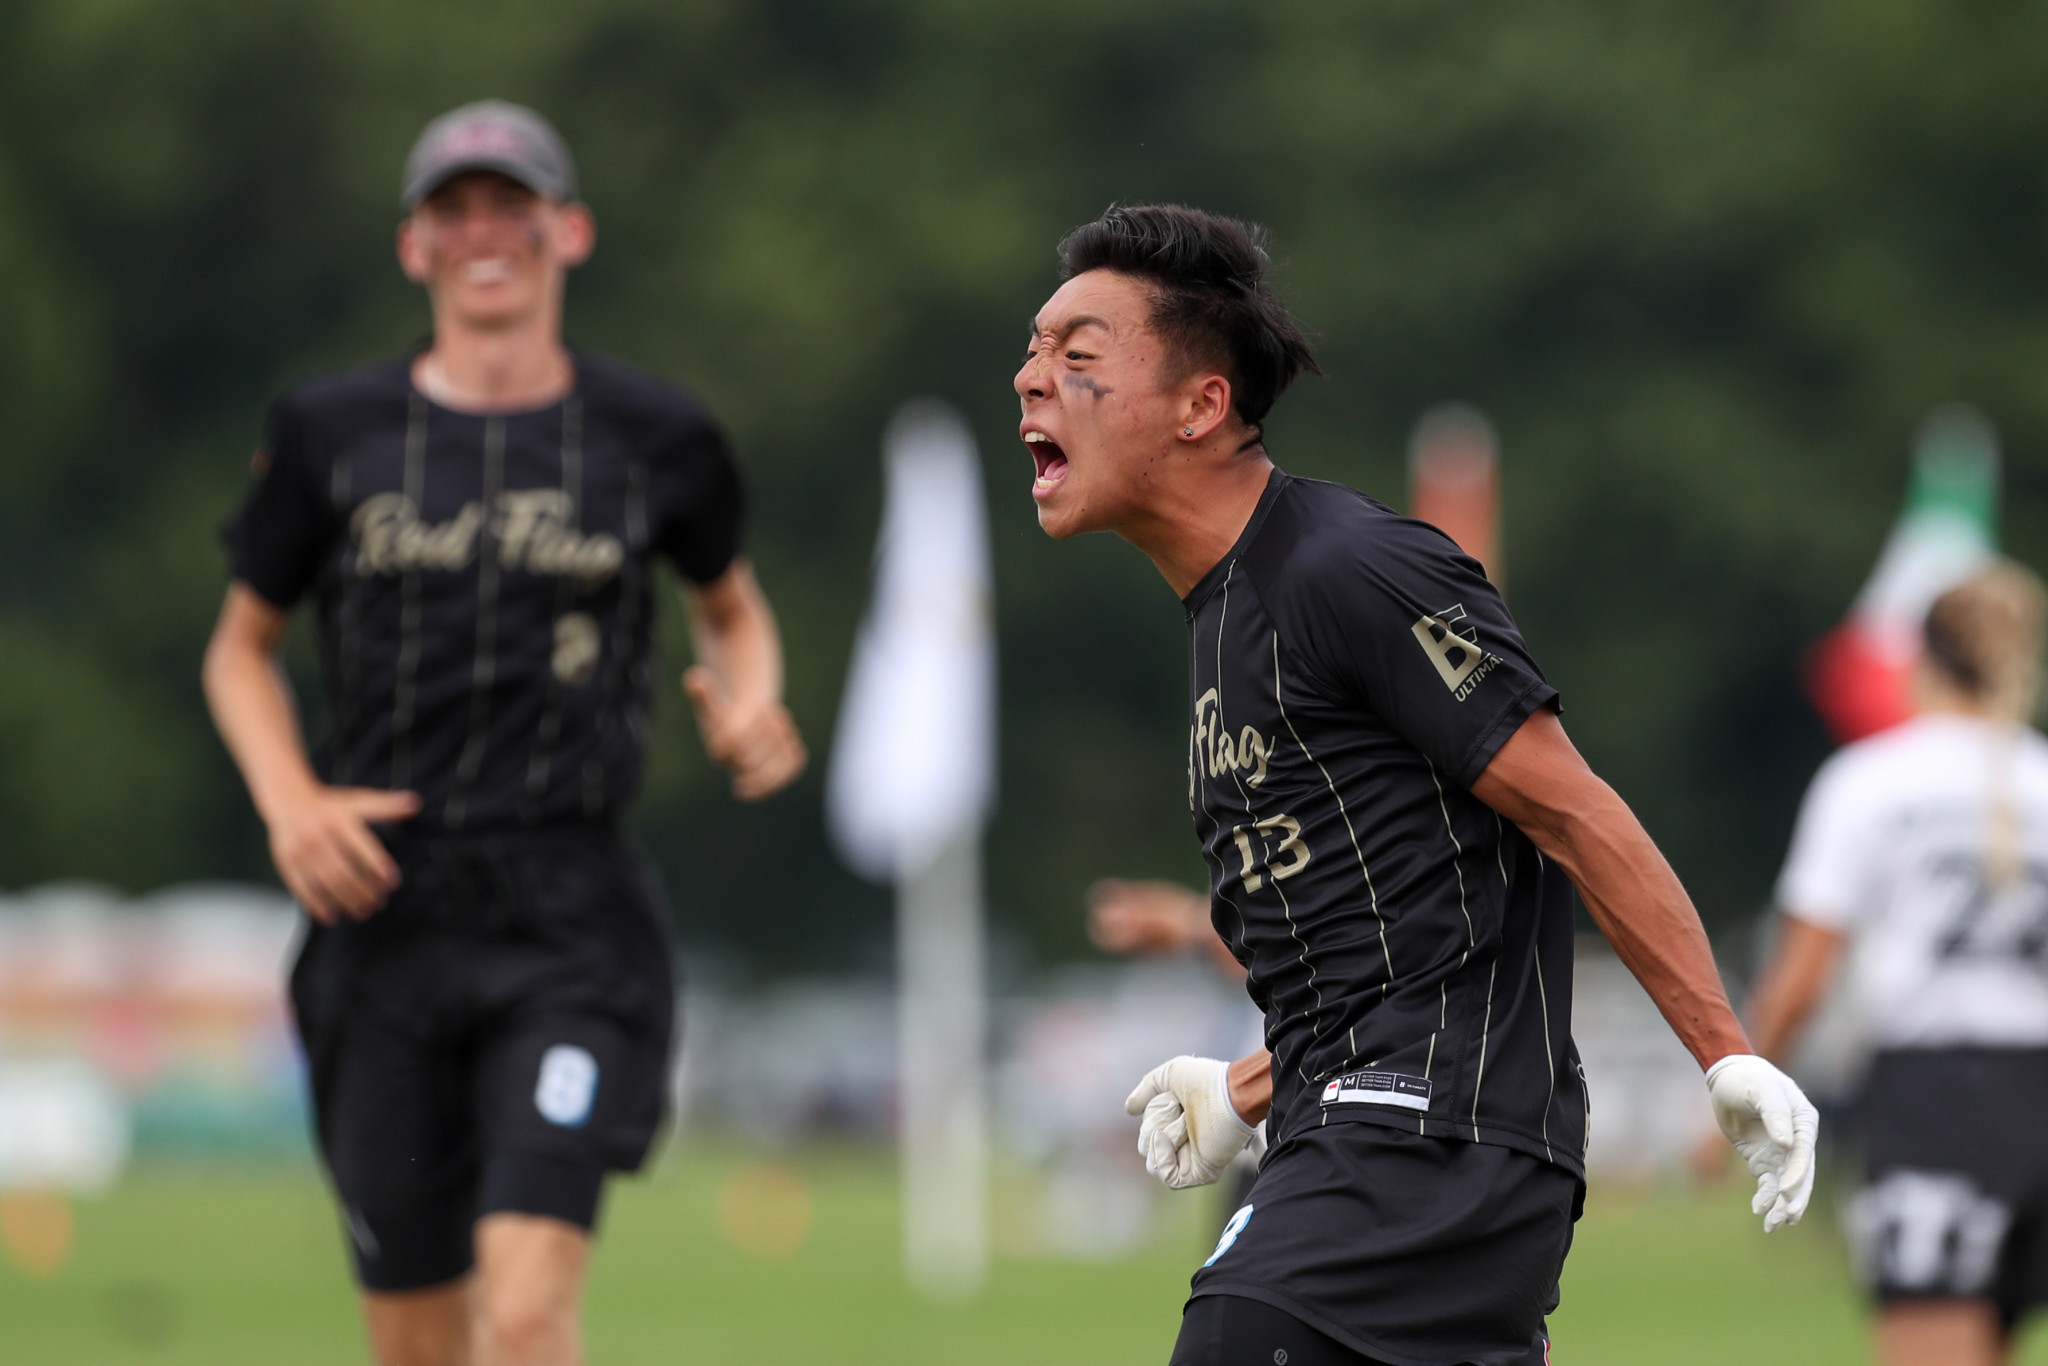 Red Flag's Kevin Tong released passion as the Canadian team sealed a place in the open final ©Paul Rutherford for UltiPhotos